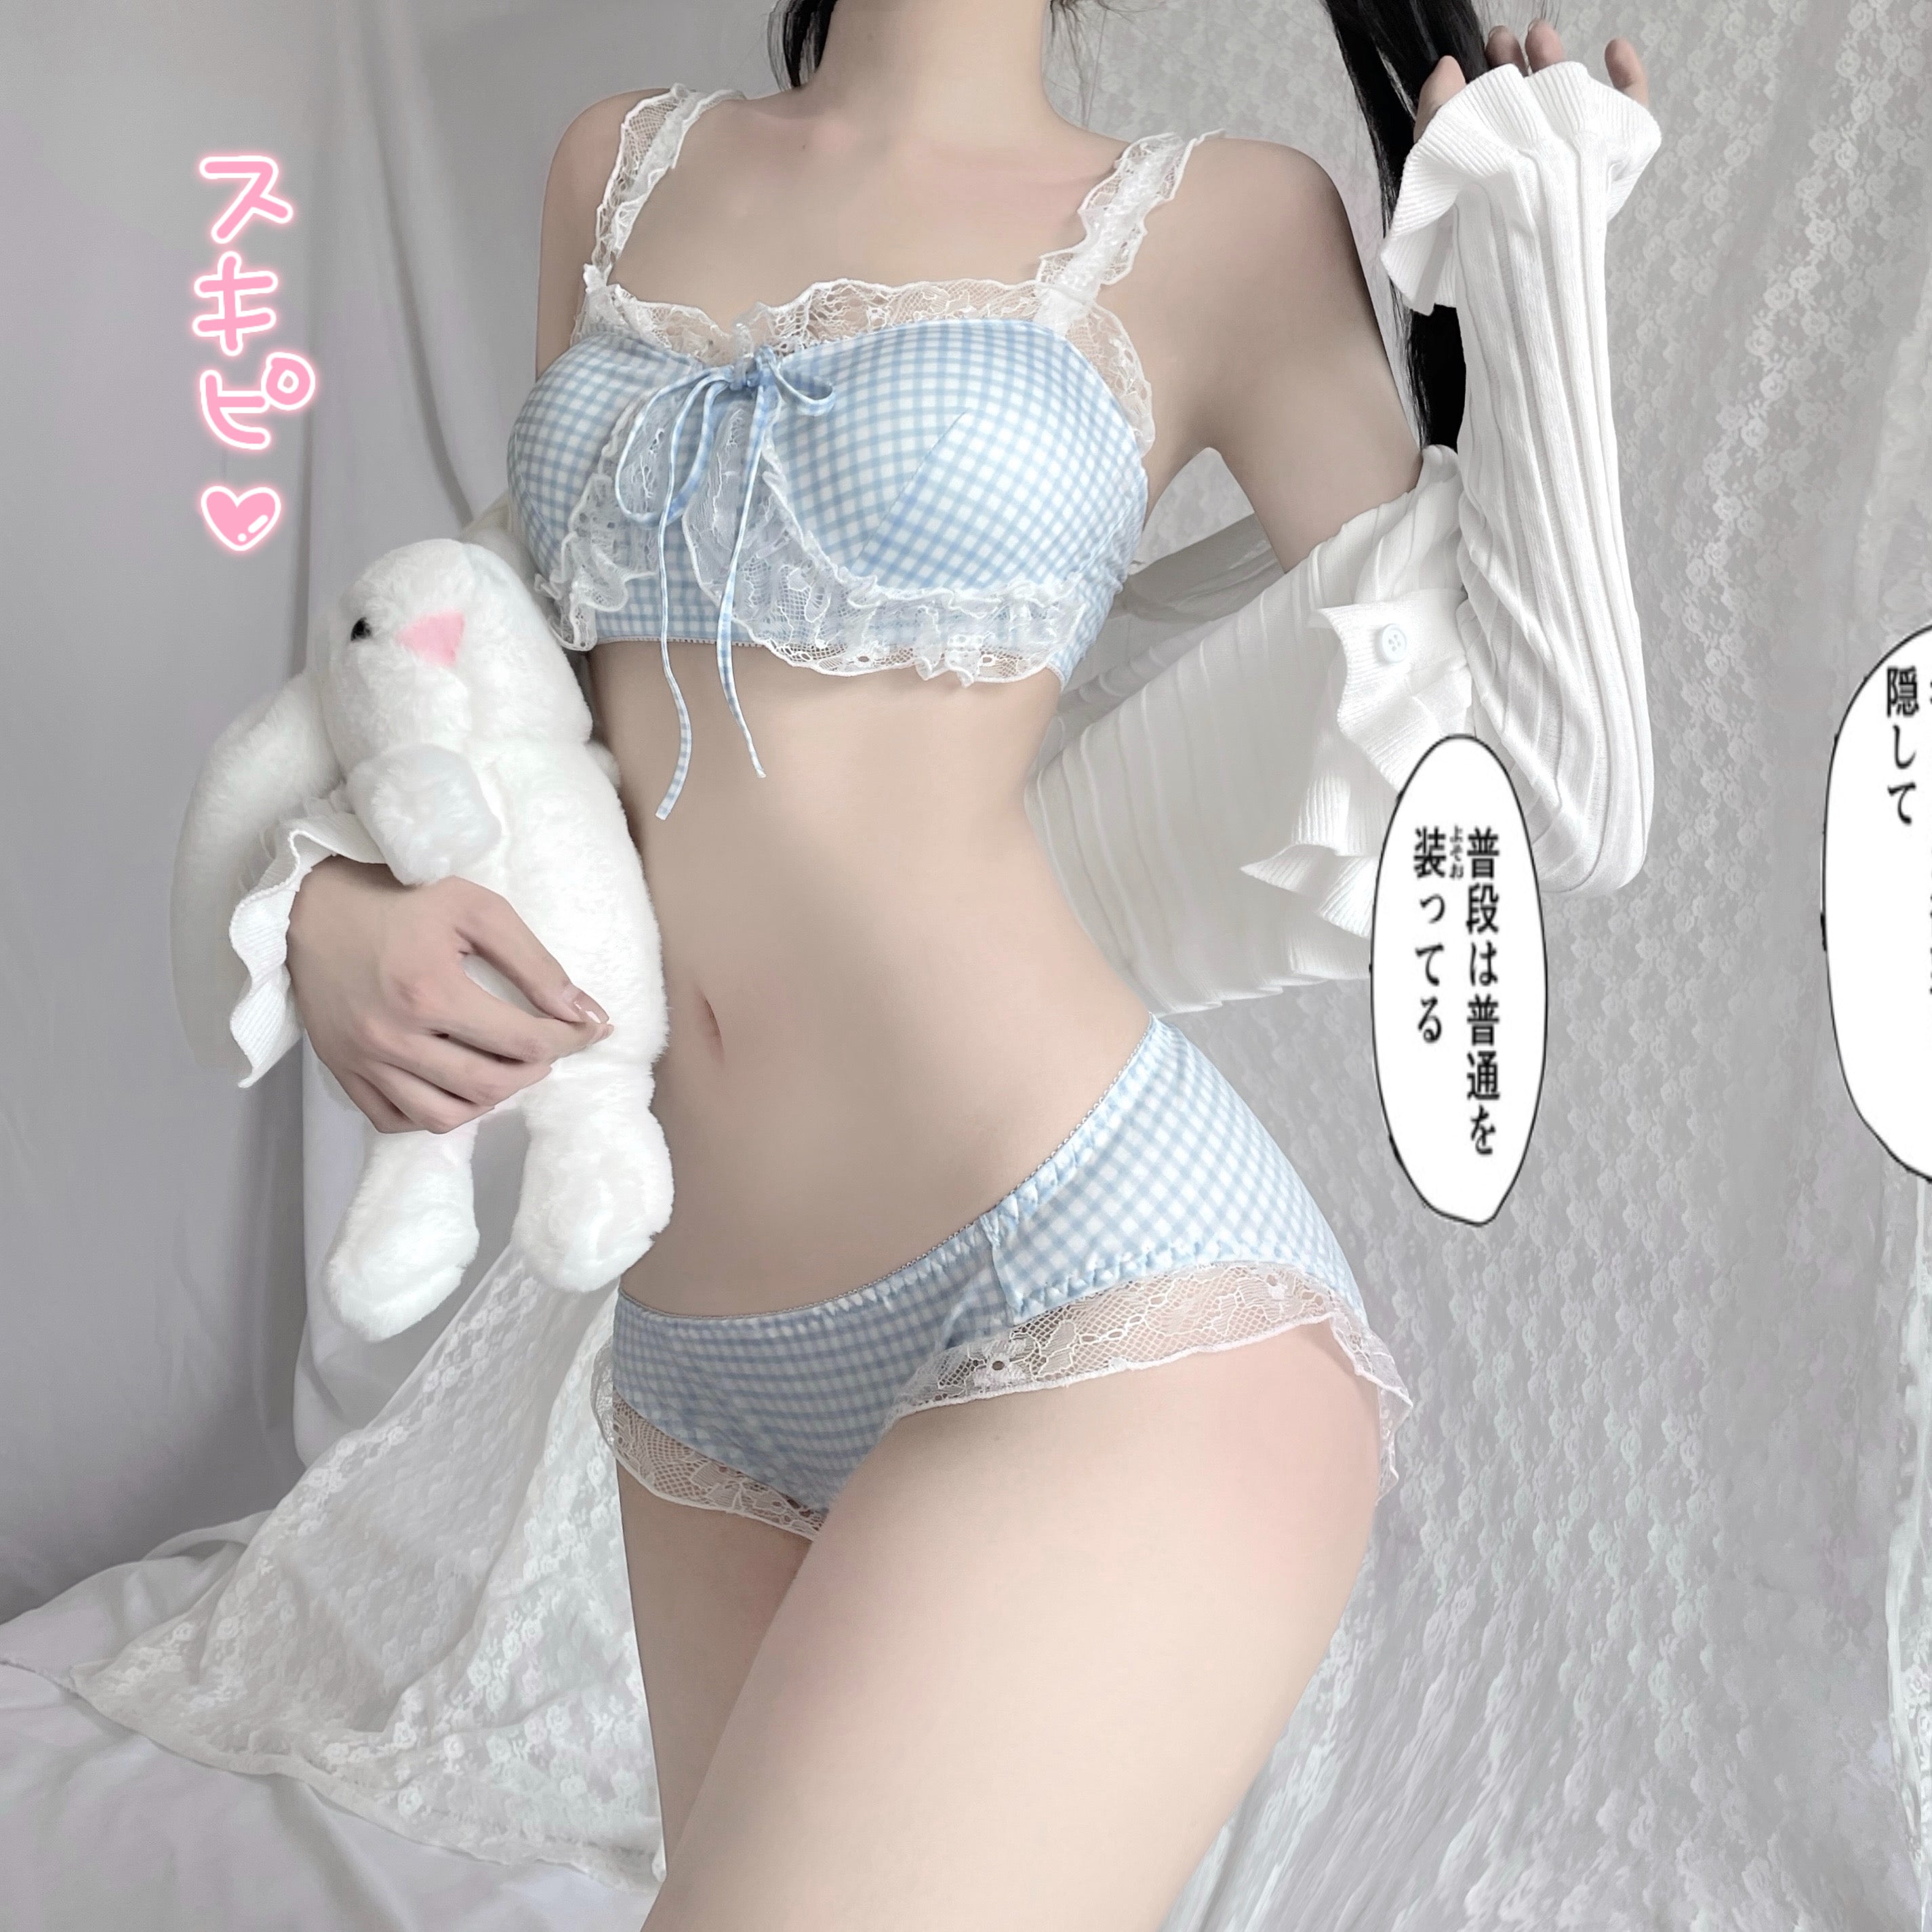 Softgirl lace tie check suitSS2651